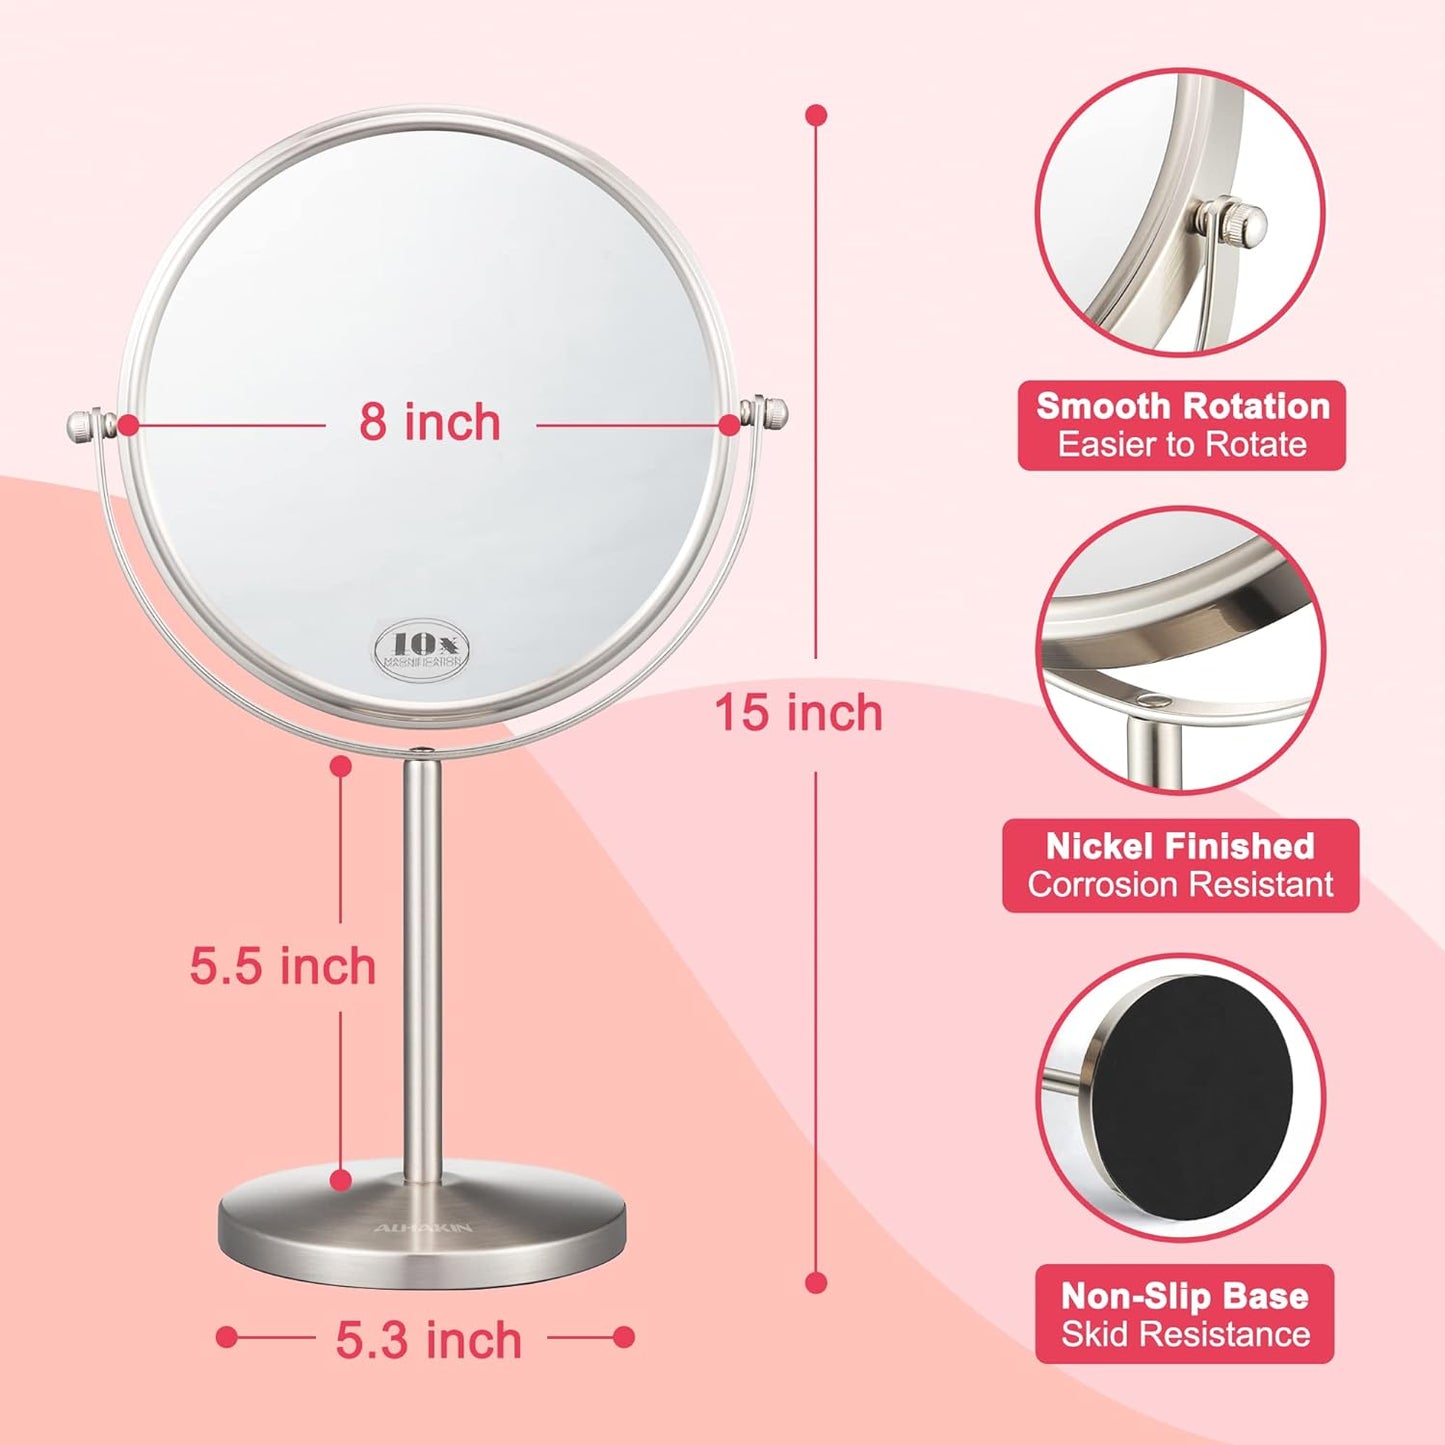 8-Inch Double Sided Vanity Tabletop Mirror with 10X Magnification